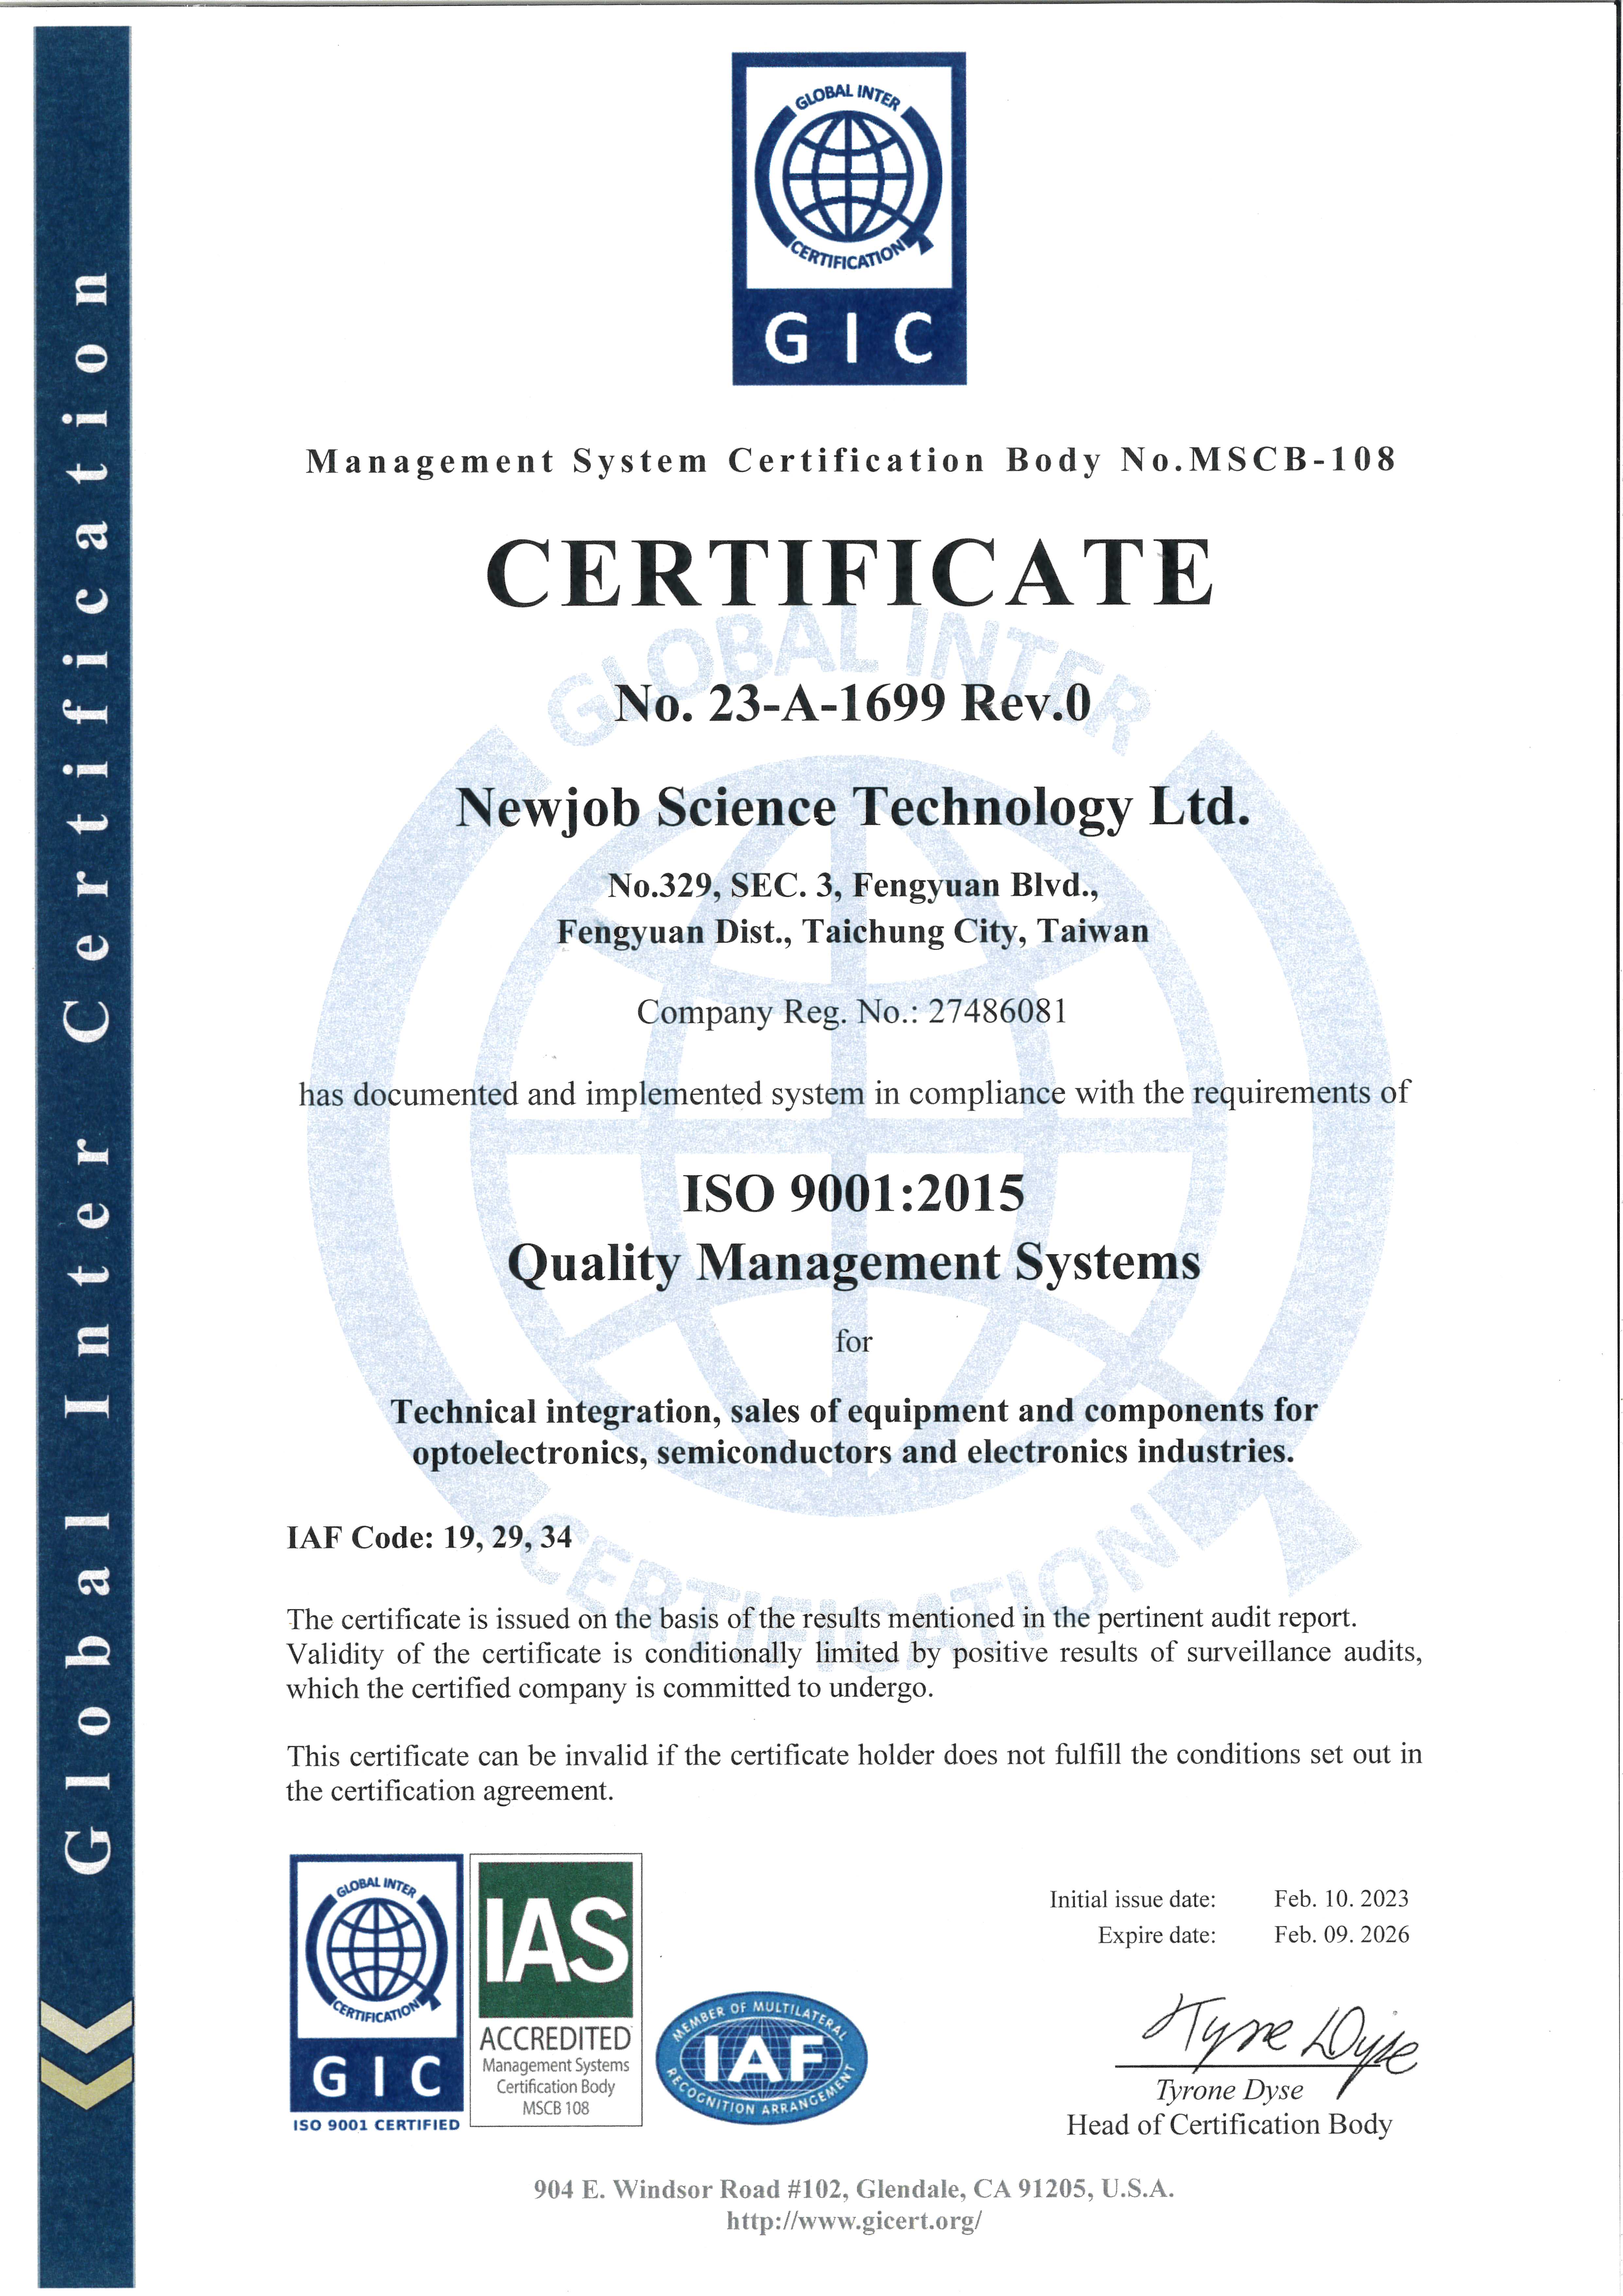 Newjob obtained ISO:9001 certification